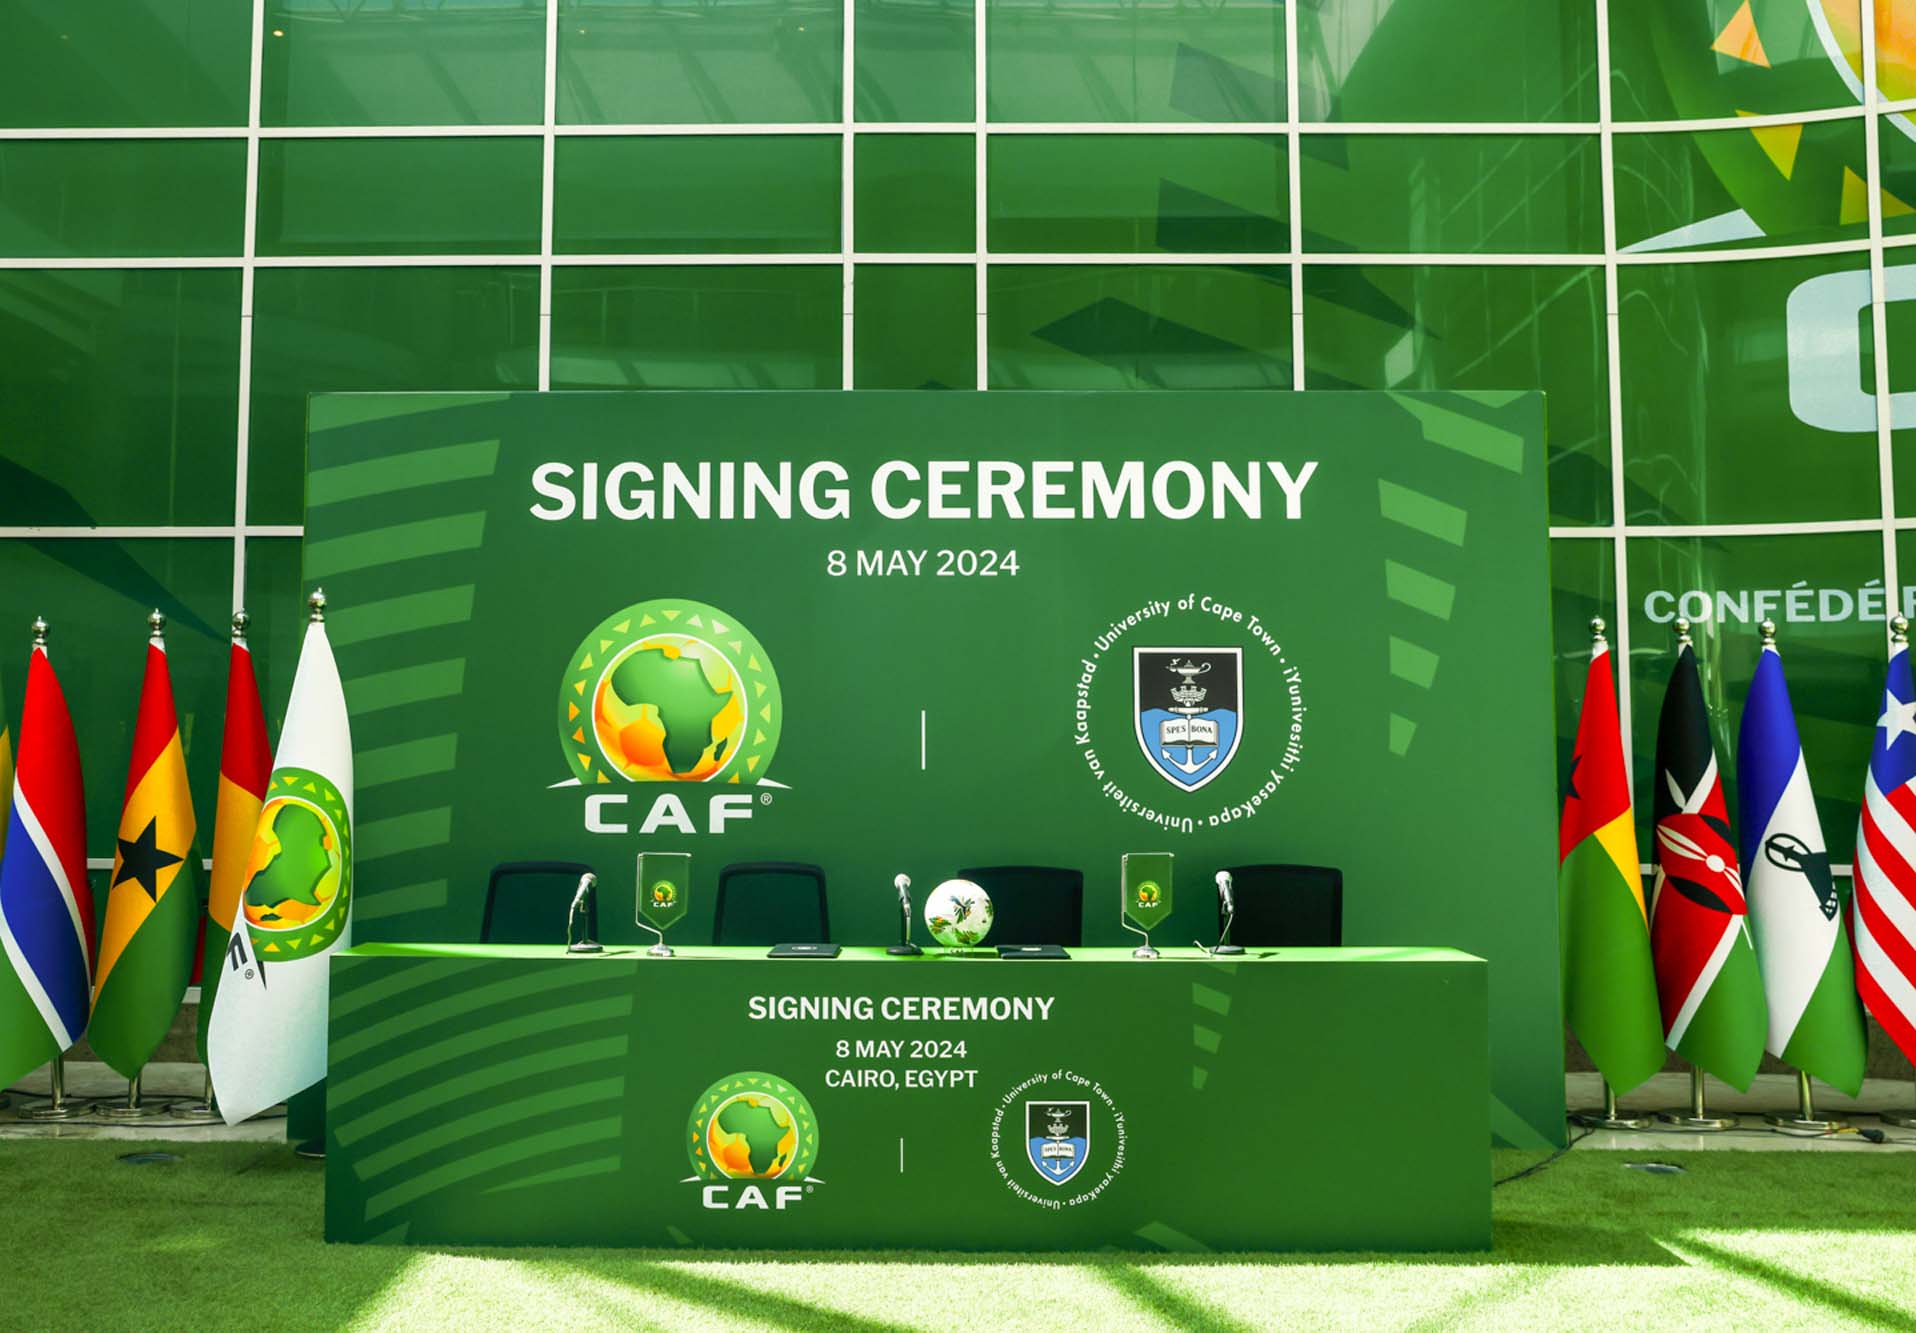 CAF and UCT branded table at the signing ceremony in Cairo, Egypt.